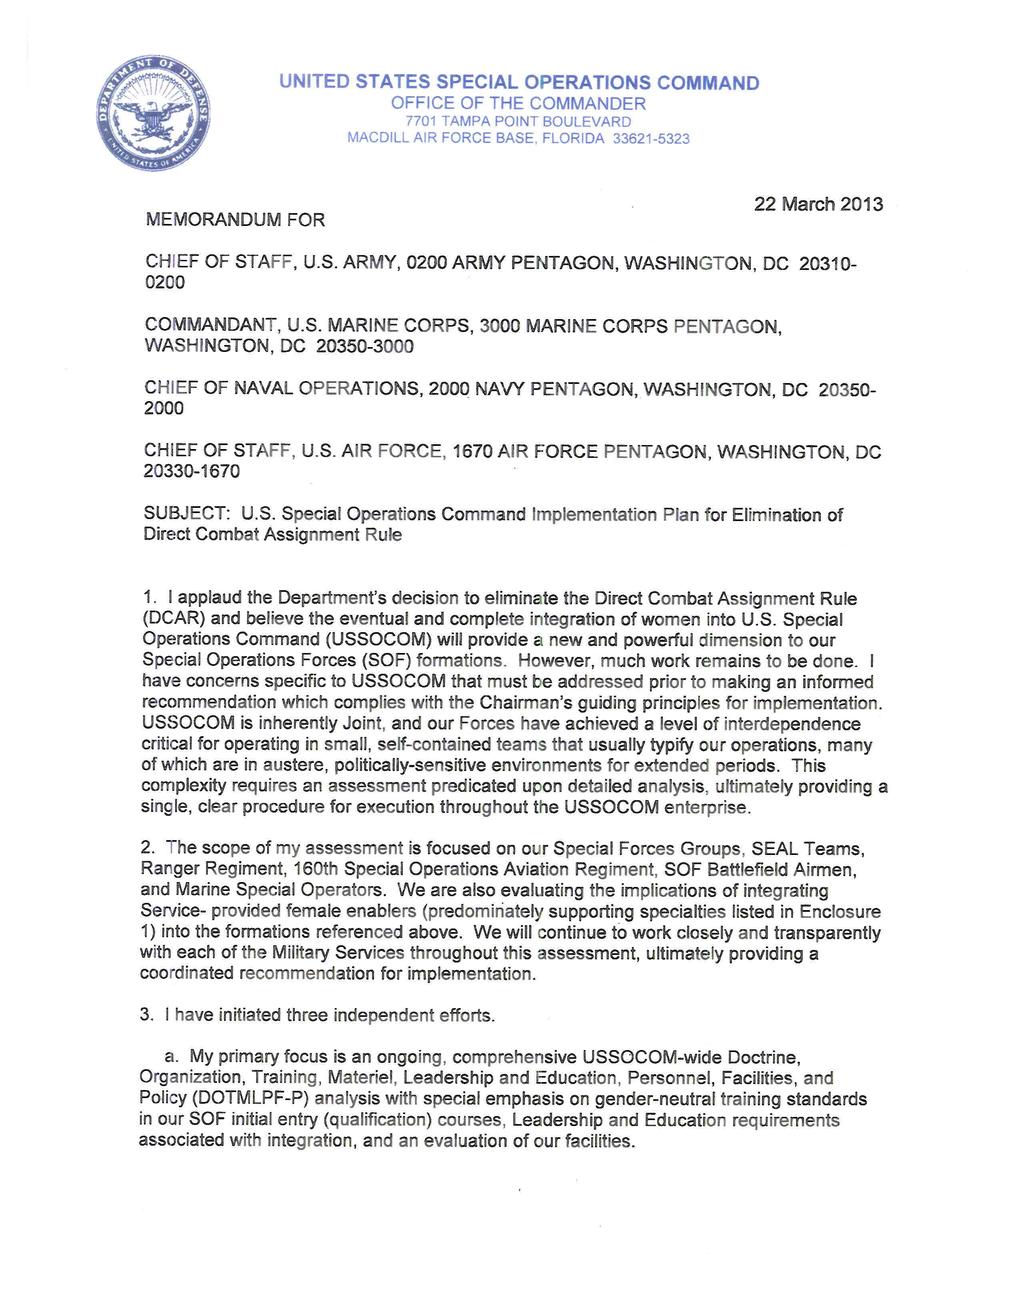 UNTED STATES SPECAL OPERATONS COMMAND OFFCE OF THE COMMANDER 7701 TAMPA PONT BOULEVARD MACDLL AR FORCE BASE, FLORDA 33621-5323 MEMORANDUM FOR 22 March 2013 CHEF OF STAFF, U.S. ARMY, 0200 ARMY PENTAGON, WASHNGTON, DC 20310-0200 COMMANDANT, U.